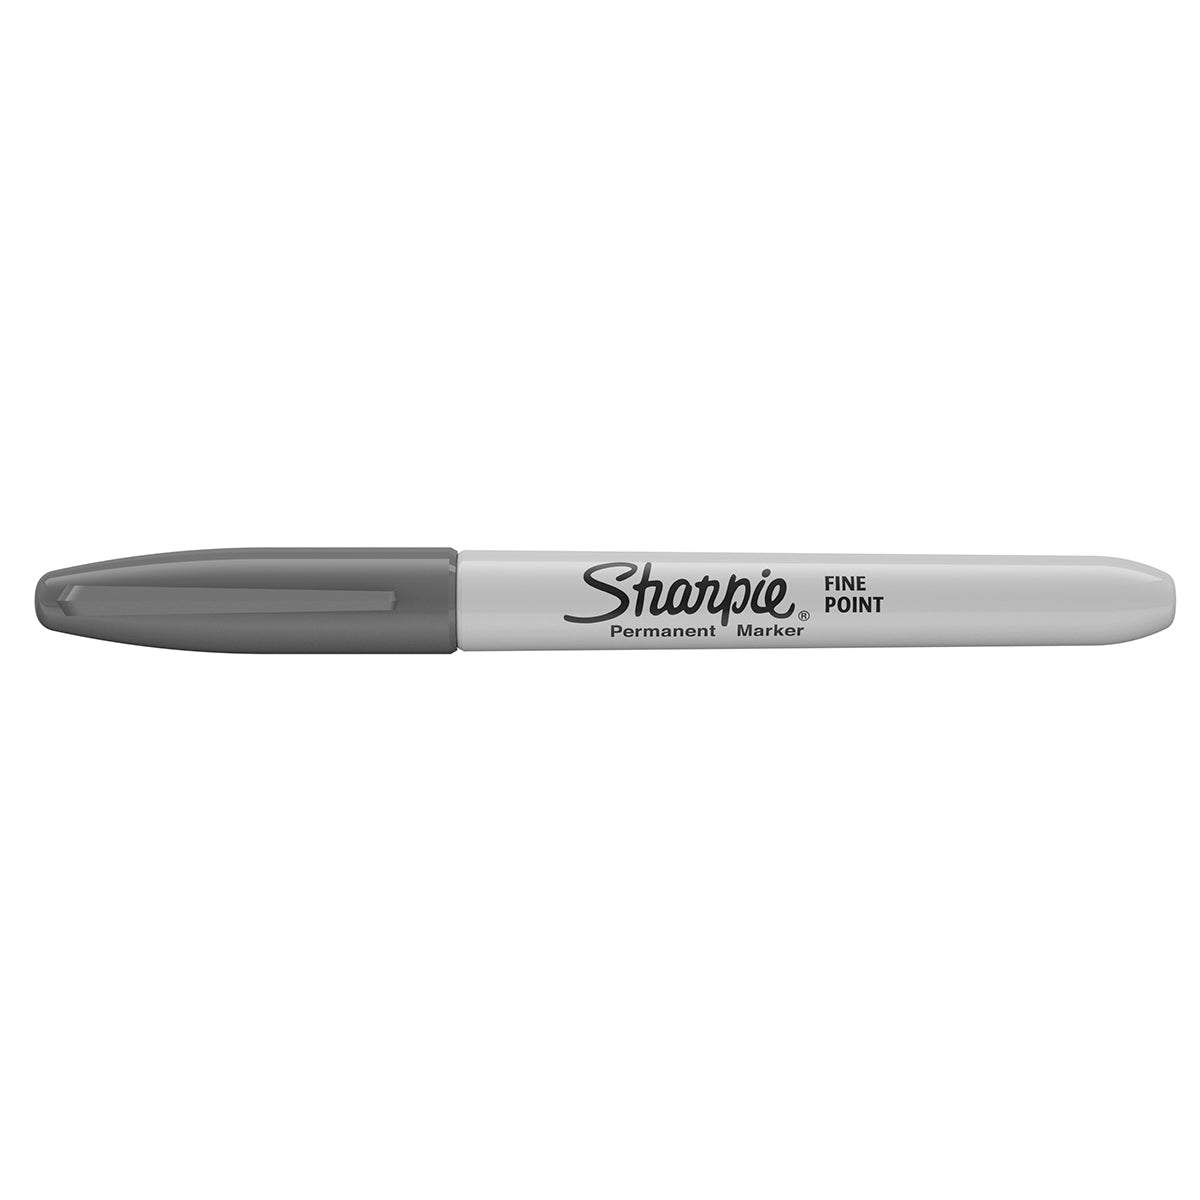 Sharpie Permanent Fine-Point Markers, Assorted Colors, Pack Of 12 Markers